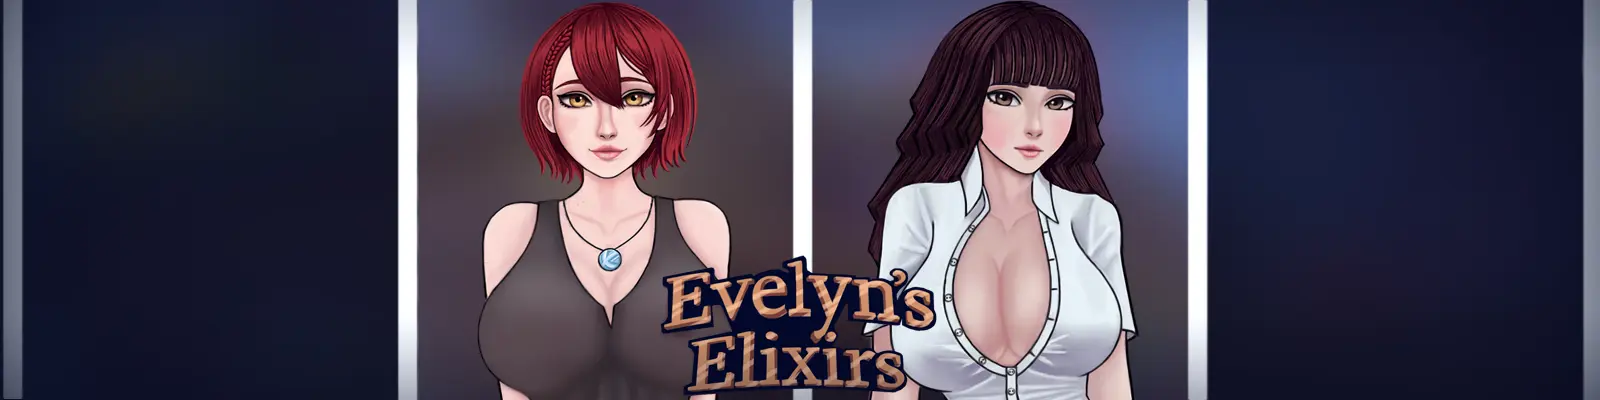 Evelyn's Elixirs [v0.1] main image